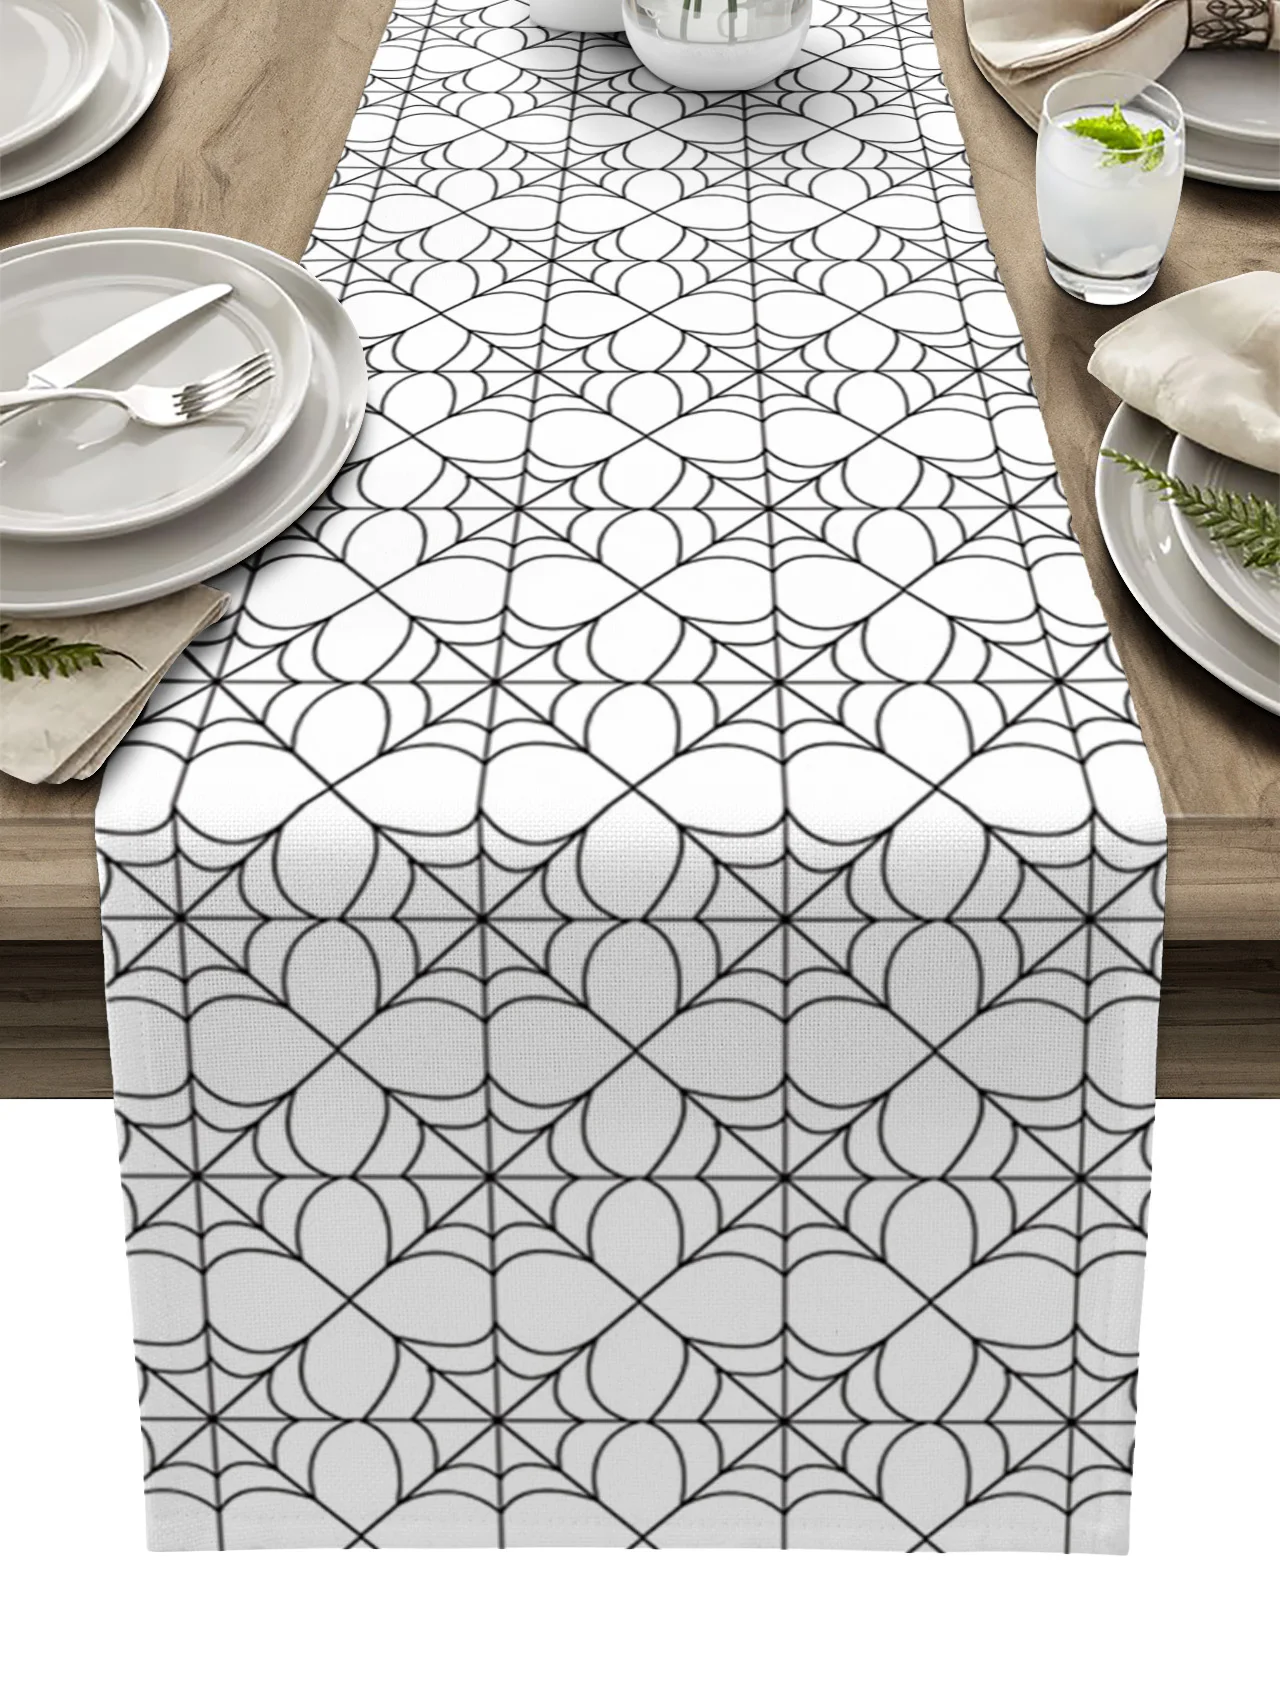 

Home Decor Table Runner Wedding Decoration Tablecloth Kitchen Table RunnersHalloween Web Tile White Background